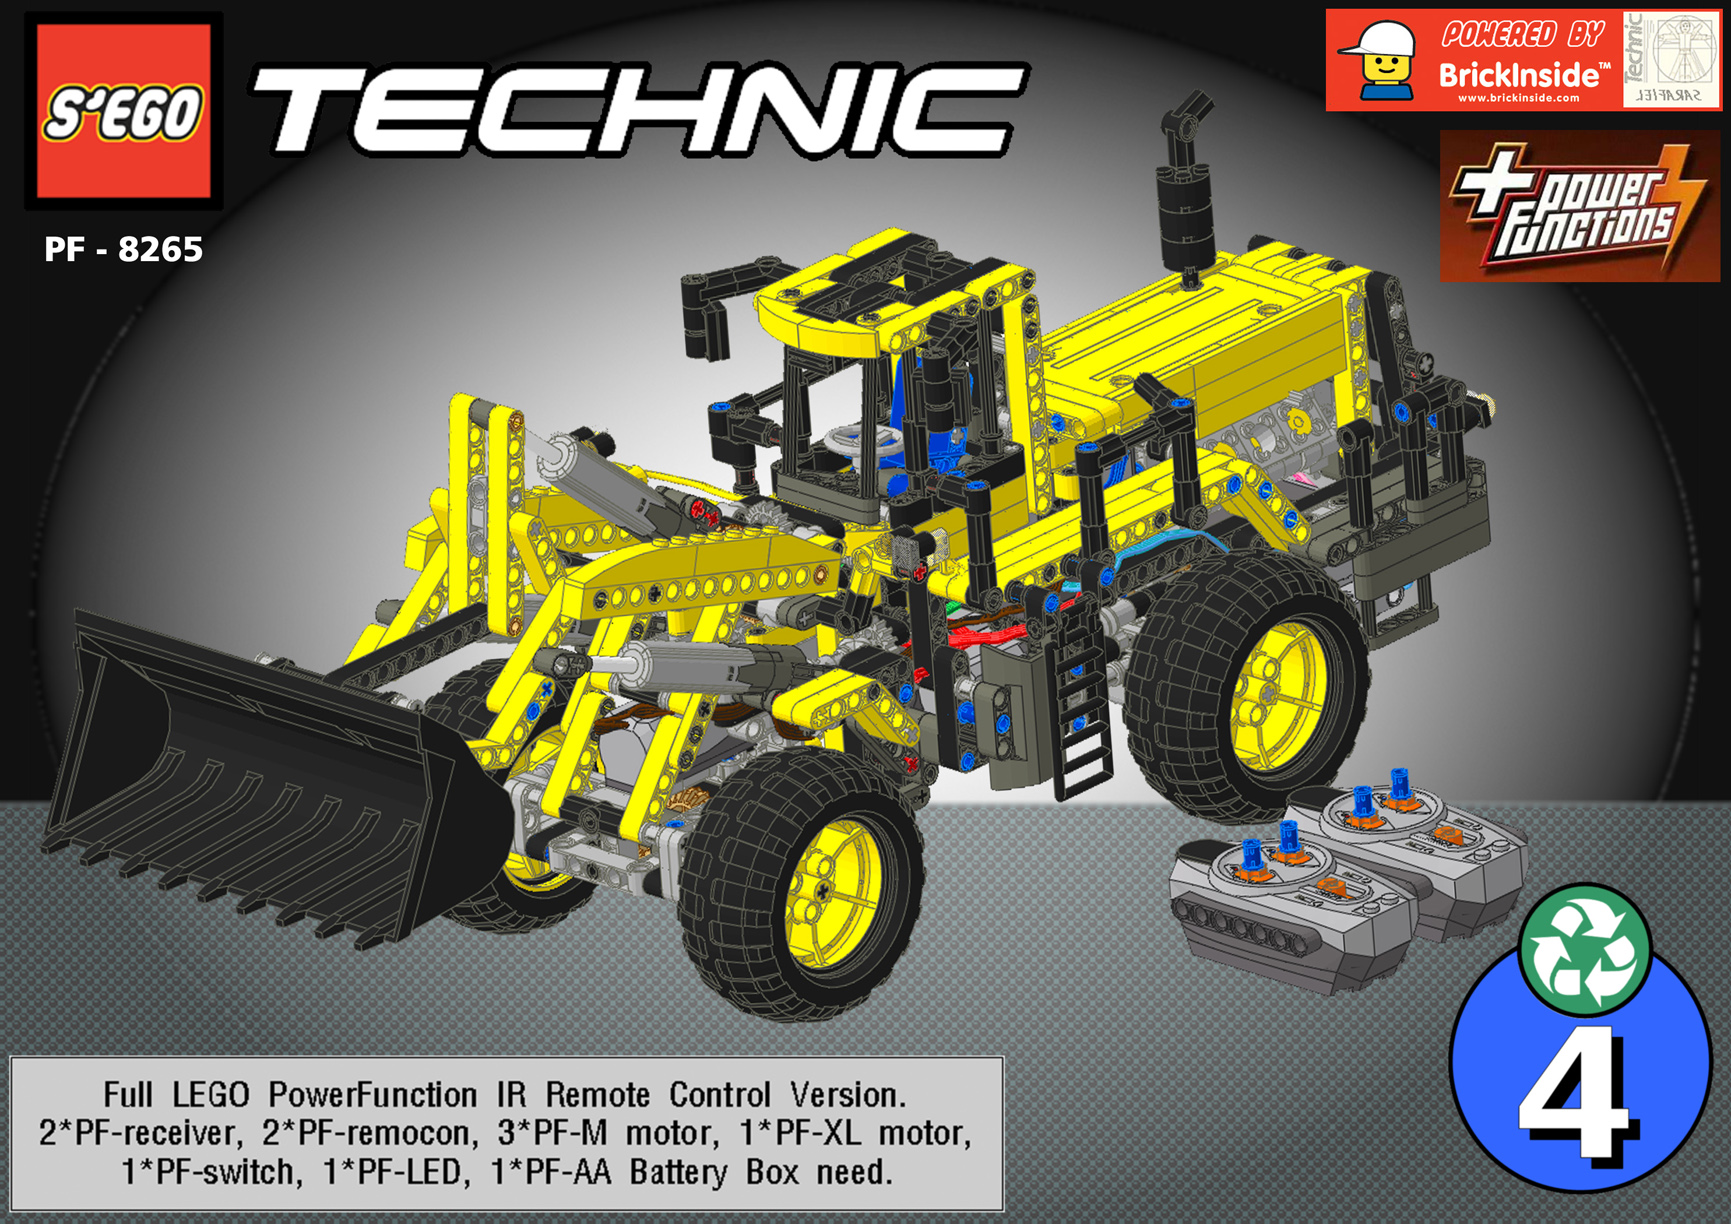 REVIEW: 8265 Wheel Loader - Page 4 - Technic, Mindstorms, Team and Scale Modeling Forums